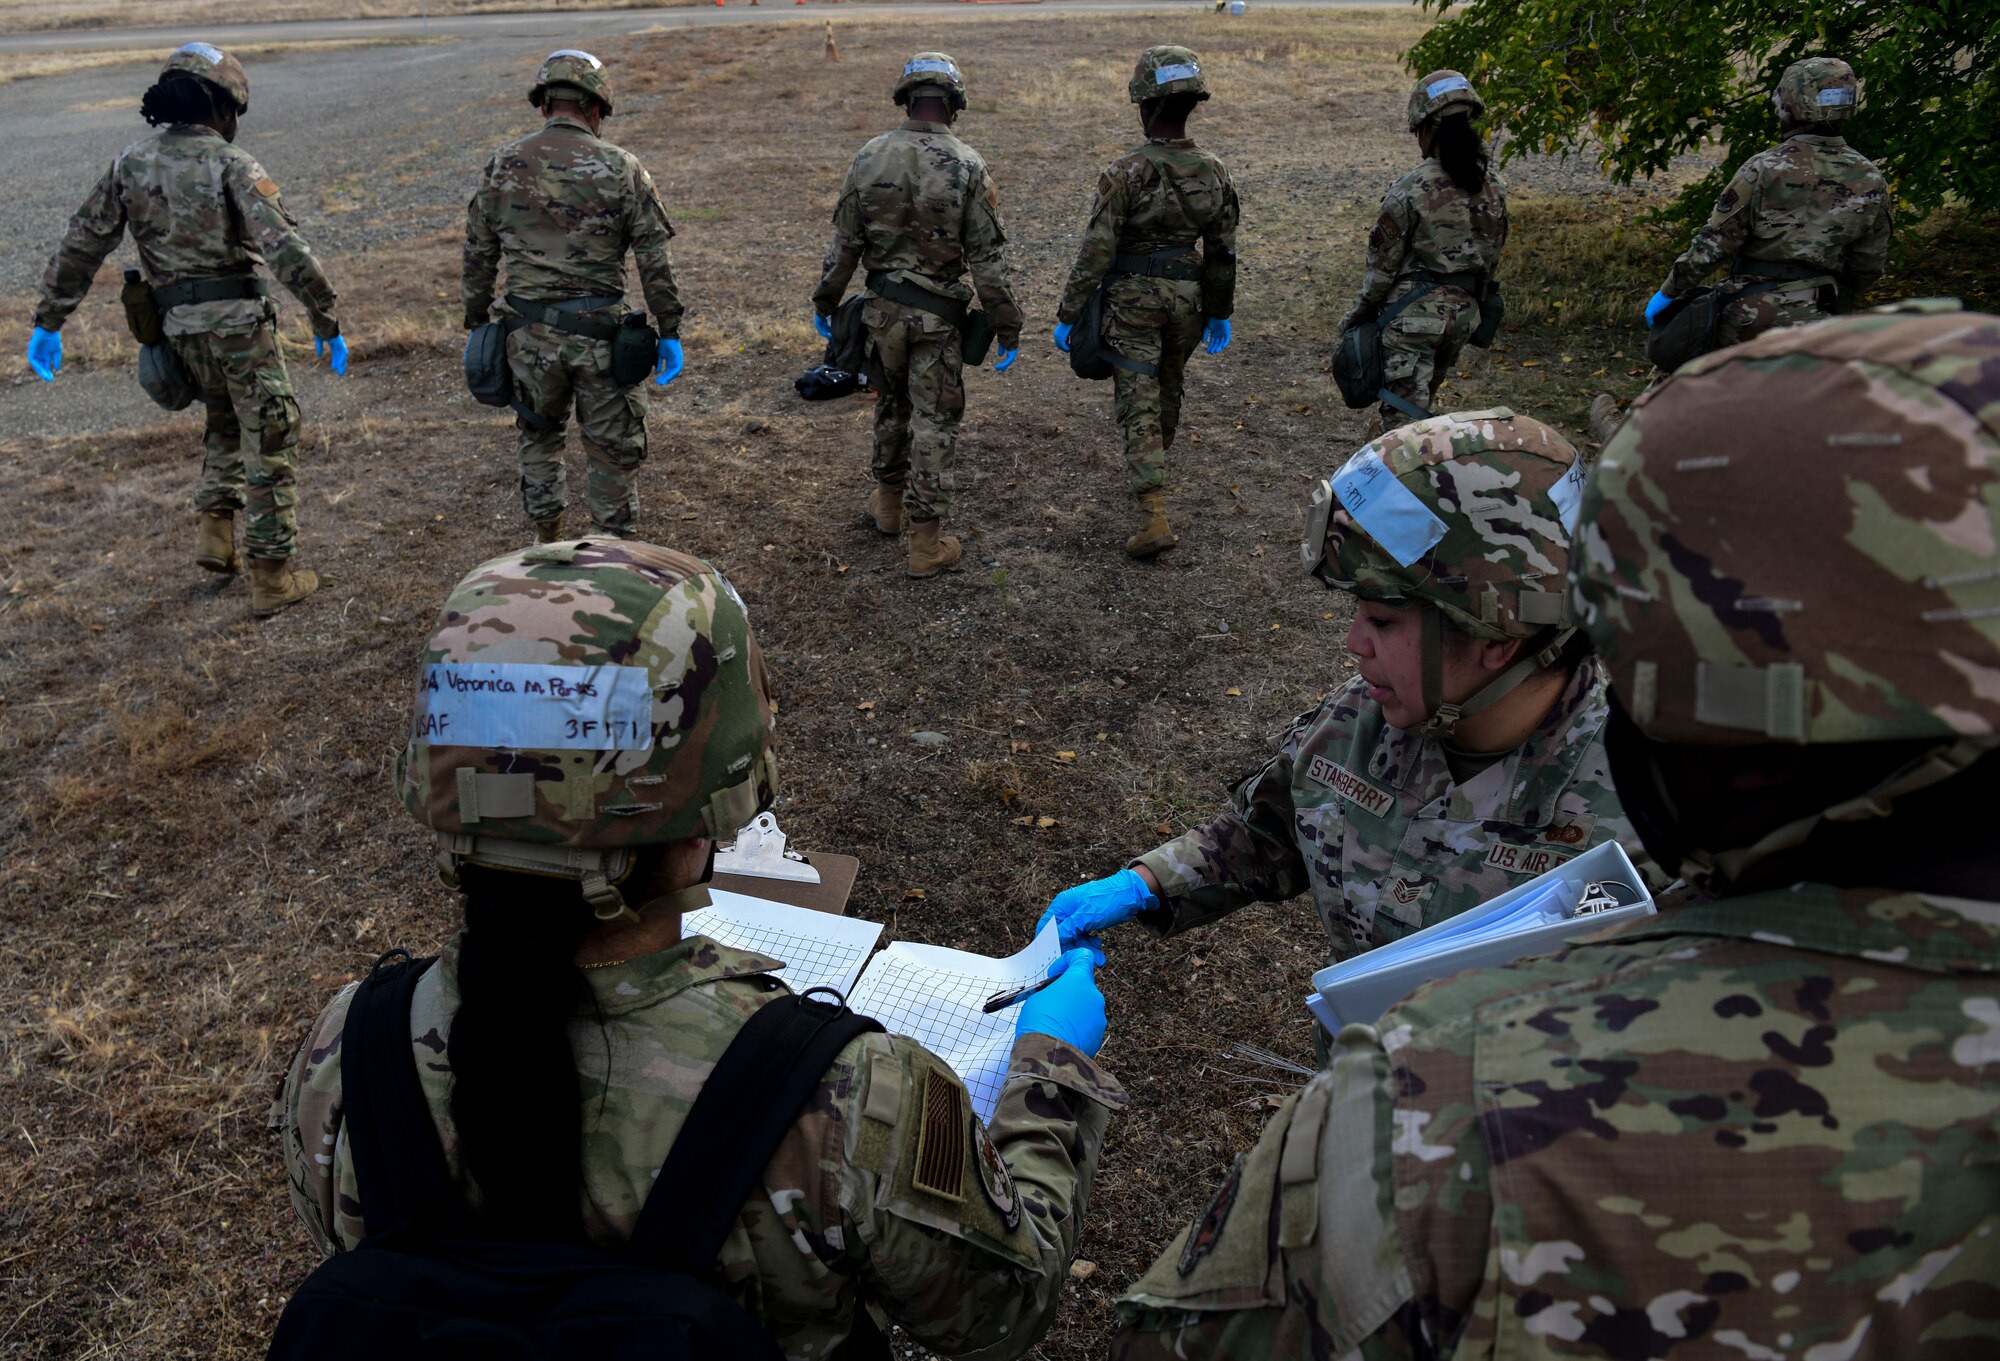 Airmen from the 9th Force Support Squadron work together to walk an area for recovered Airmen